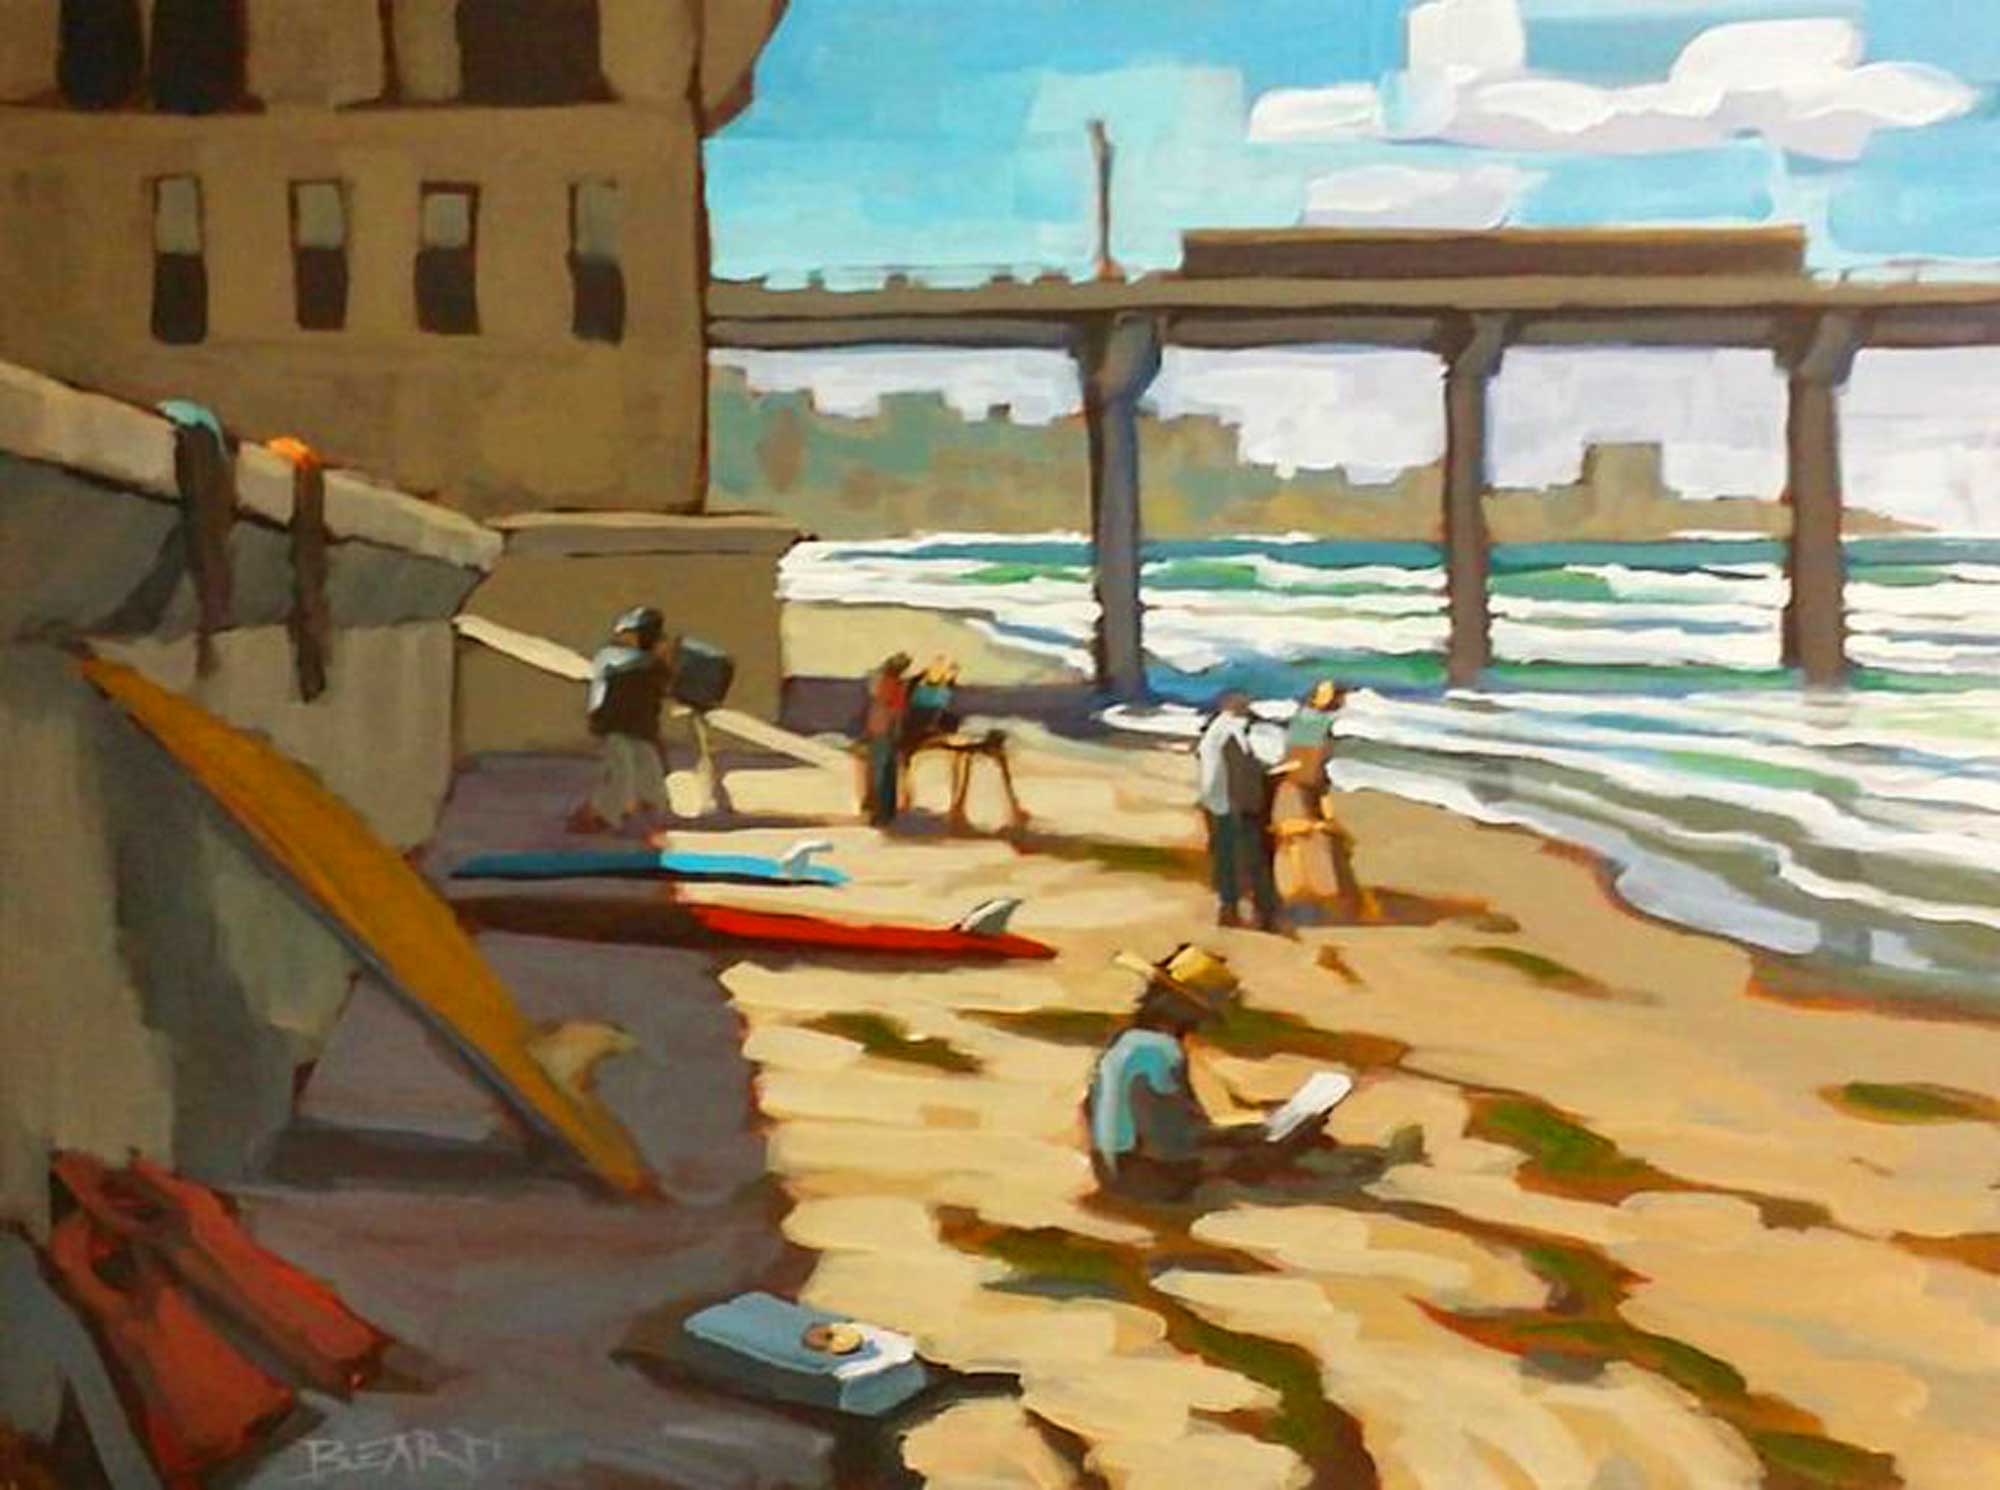 Plein air painting of artists and surfboards on the beach at Scripps pier in La Jolla on the San Diego coast of southern California.